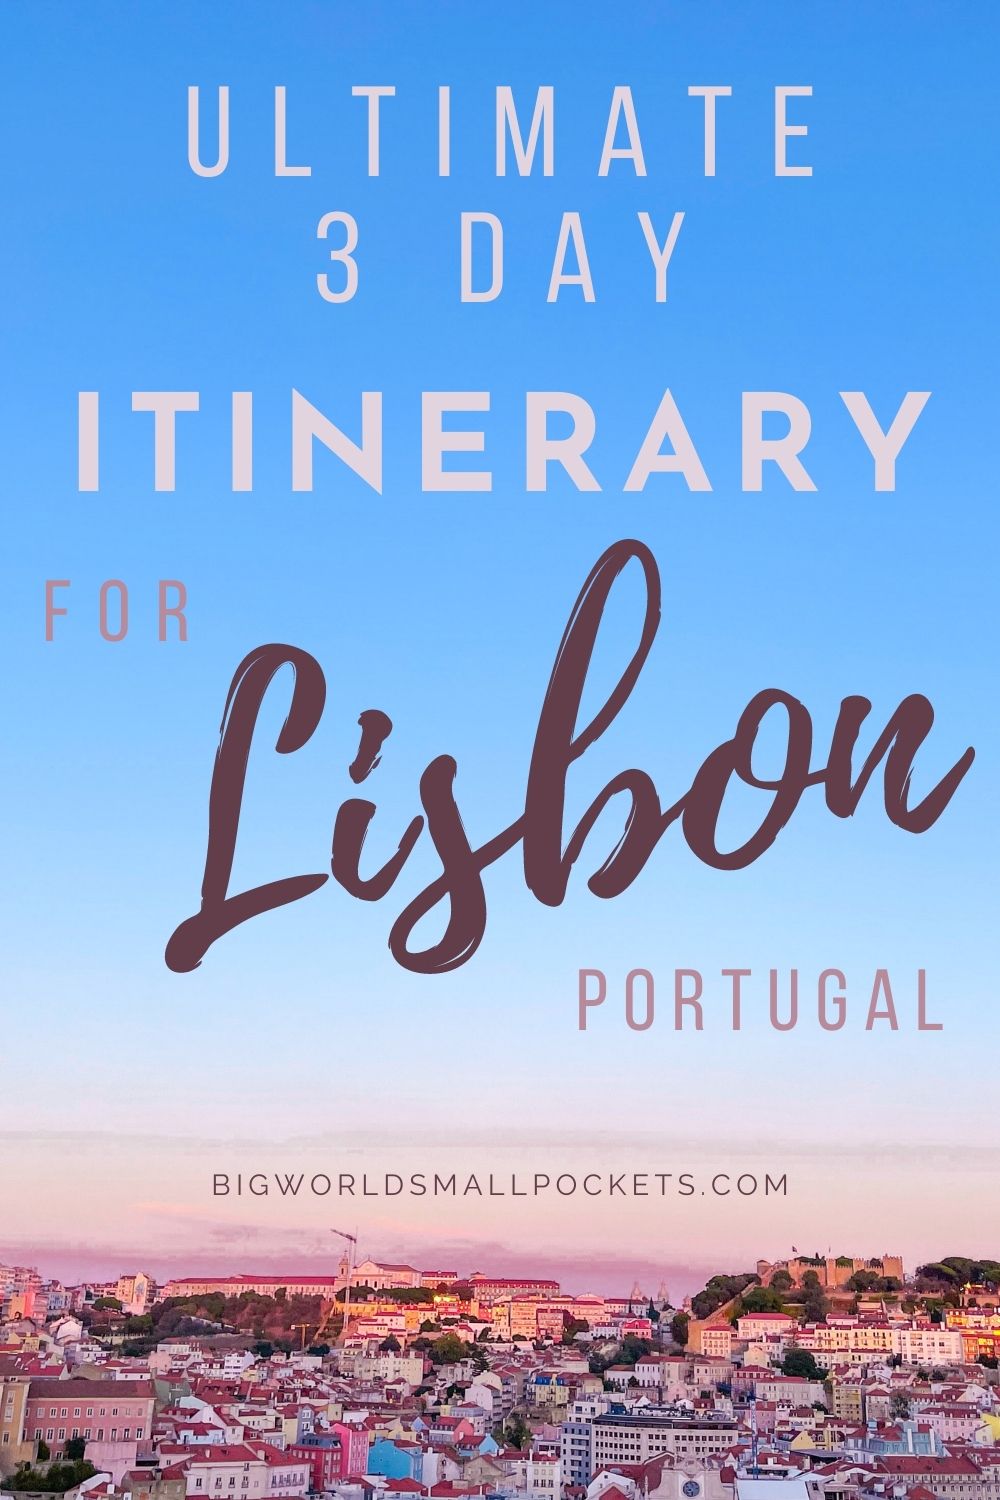 Ultimate 3 Day Itinerary for Lisbon, Portugal